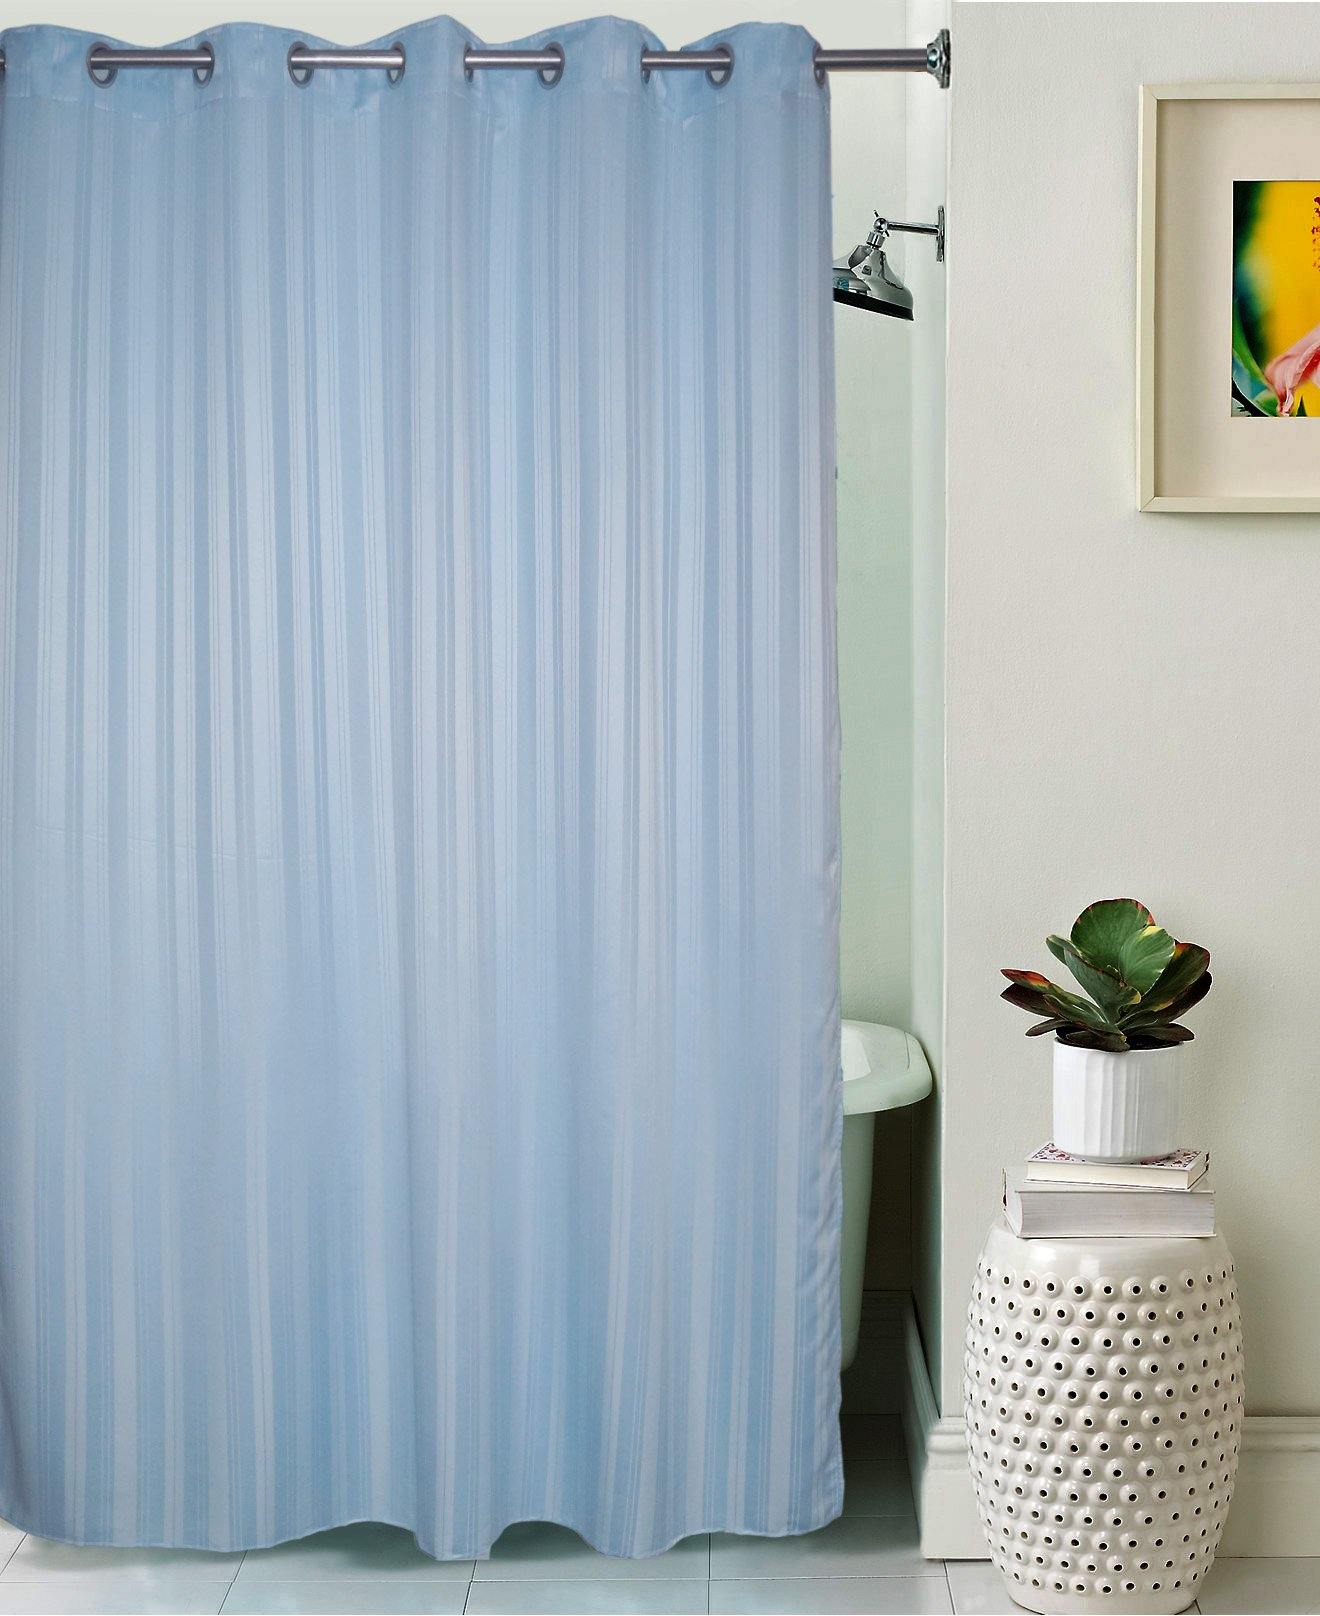 Lushomes Sky Blue Stripes Polyester Bathroom Waterproof Shower Curtain with 10 Eyelets - Lushomes